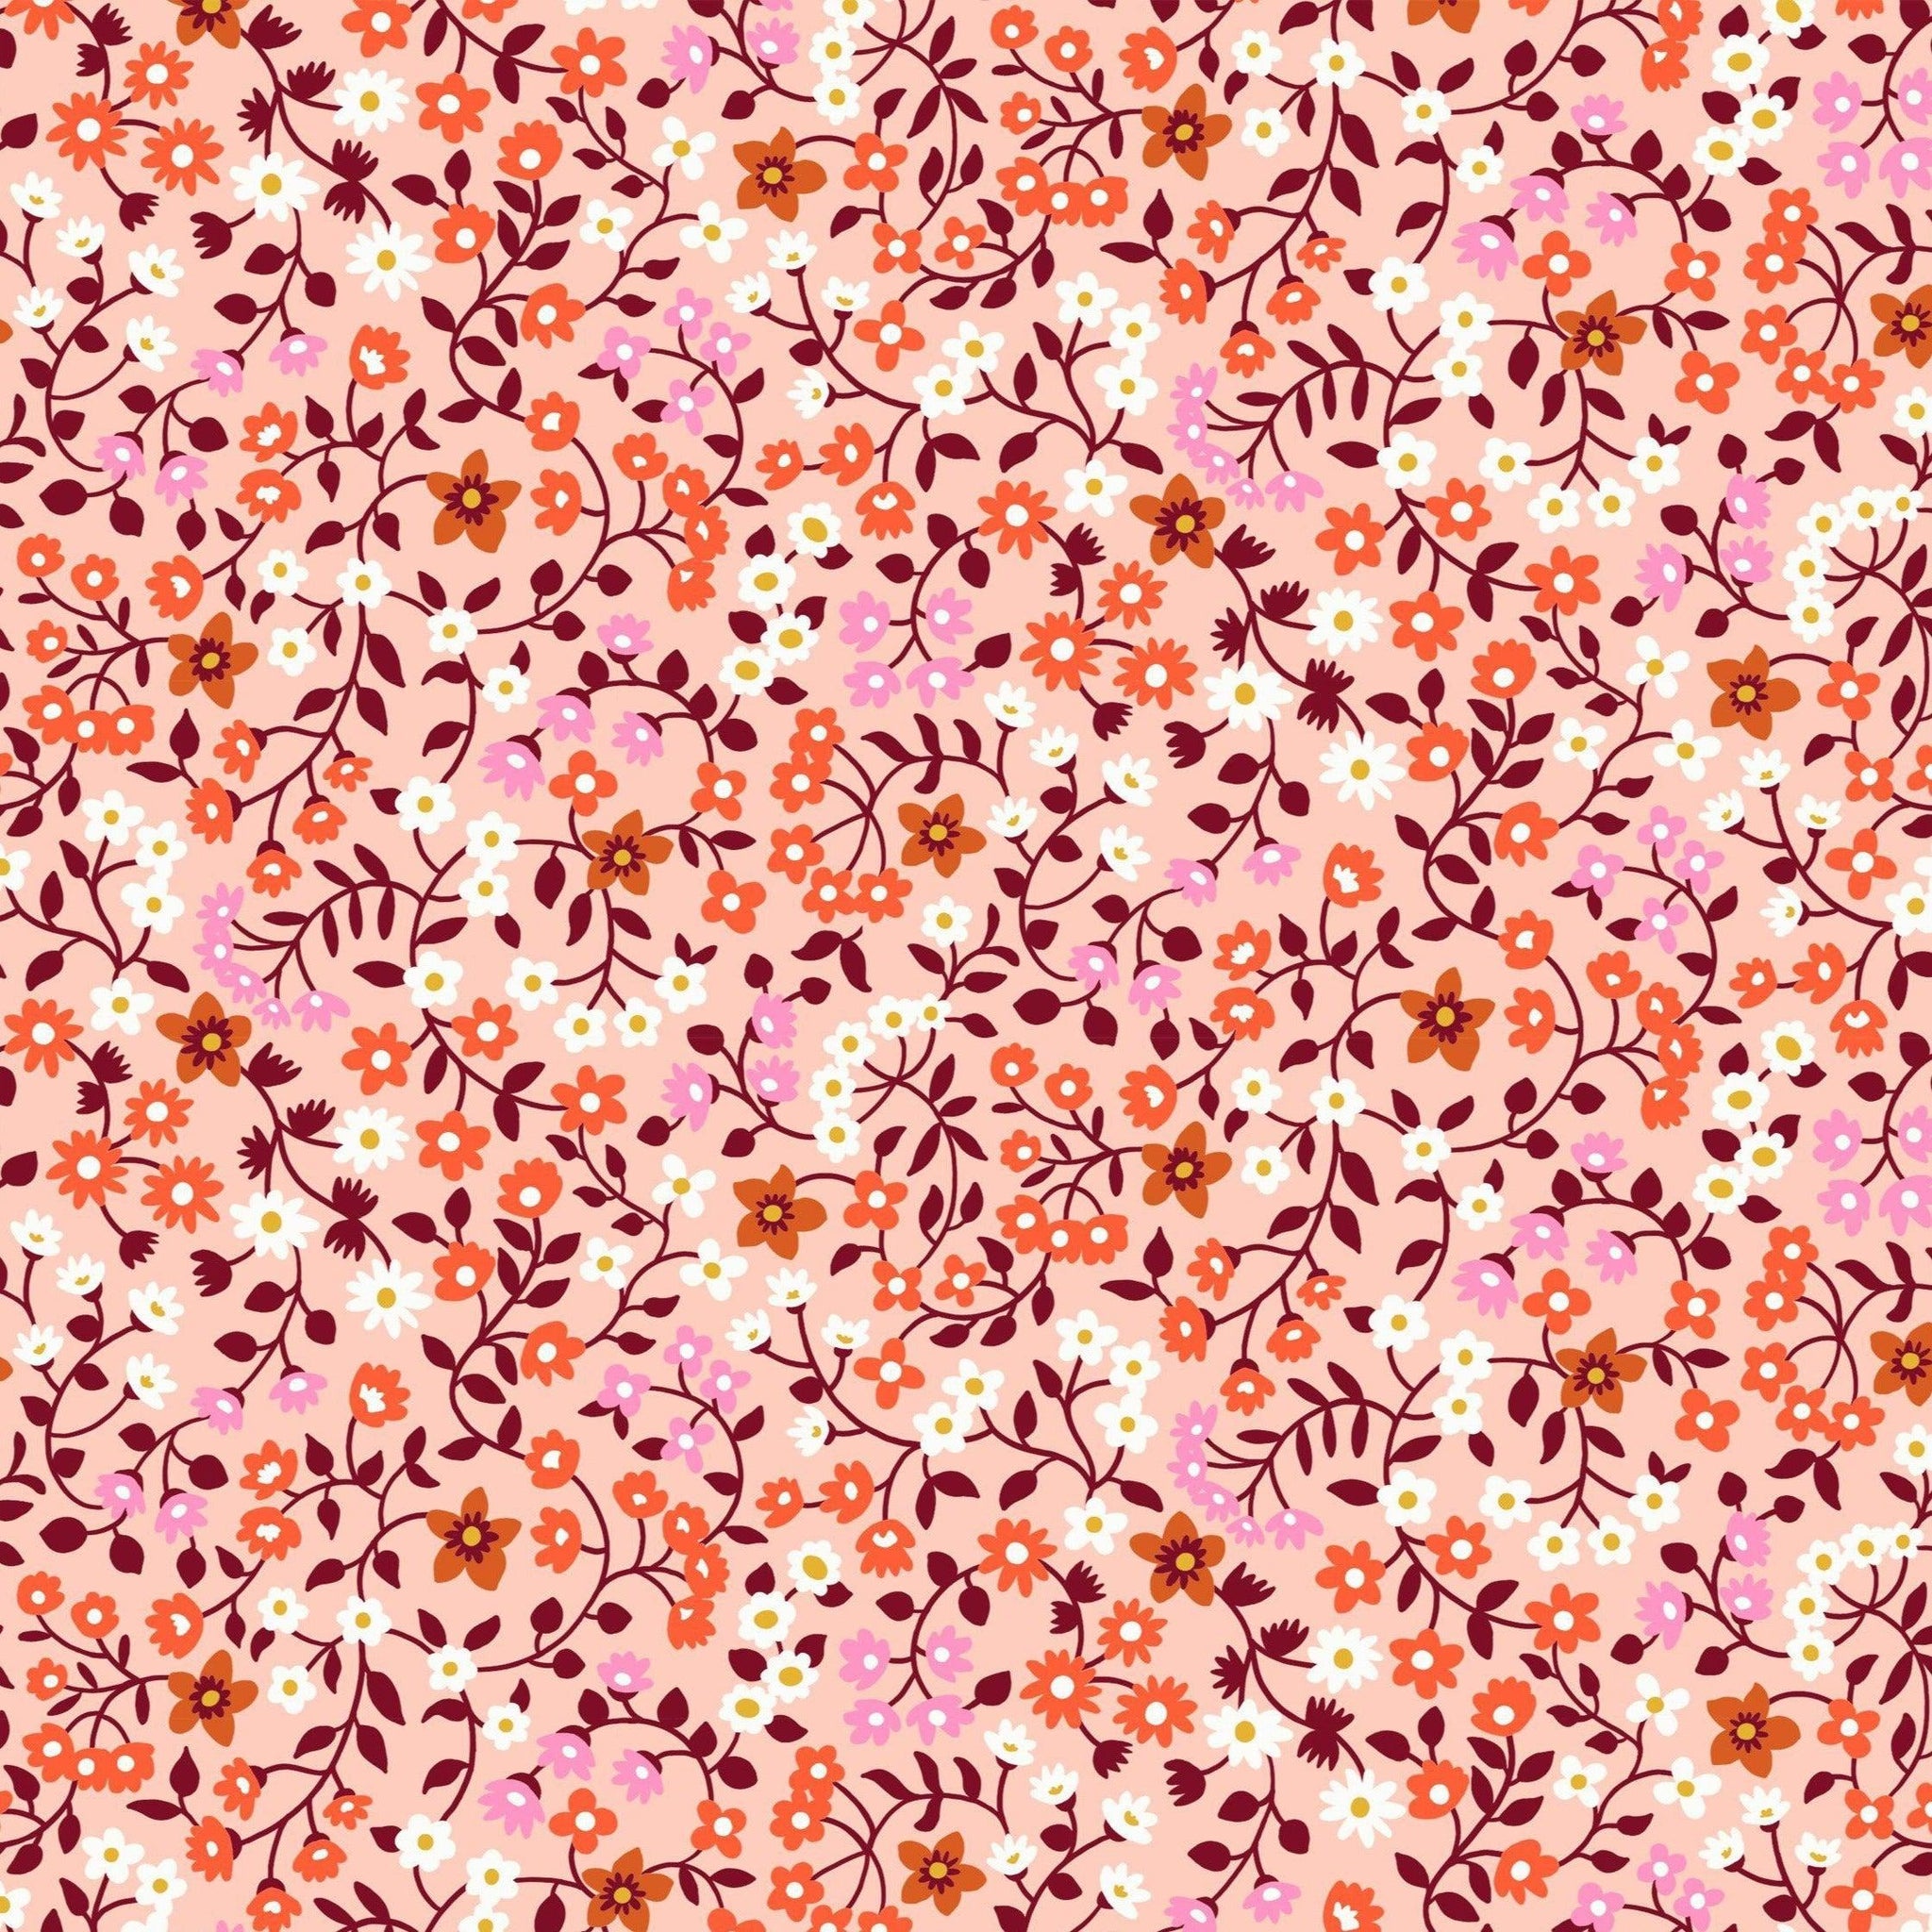 Ruby Star Society-Clothesline Floral Peach Cream-fabric-gather here online